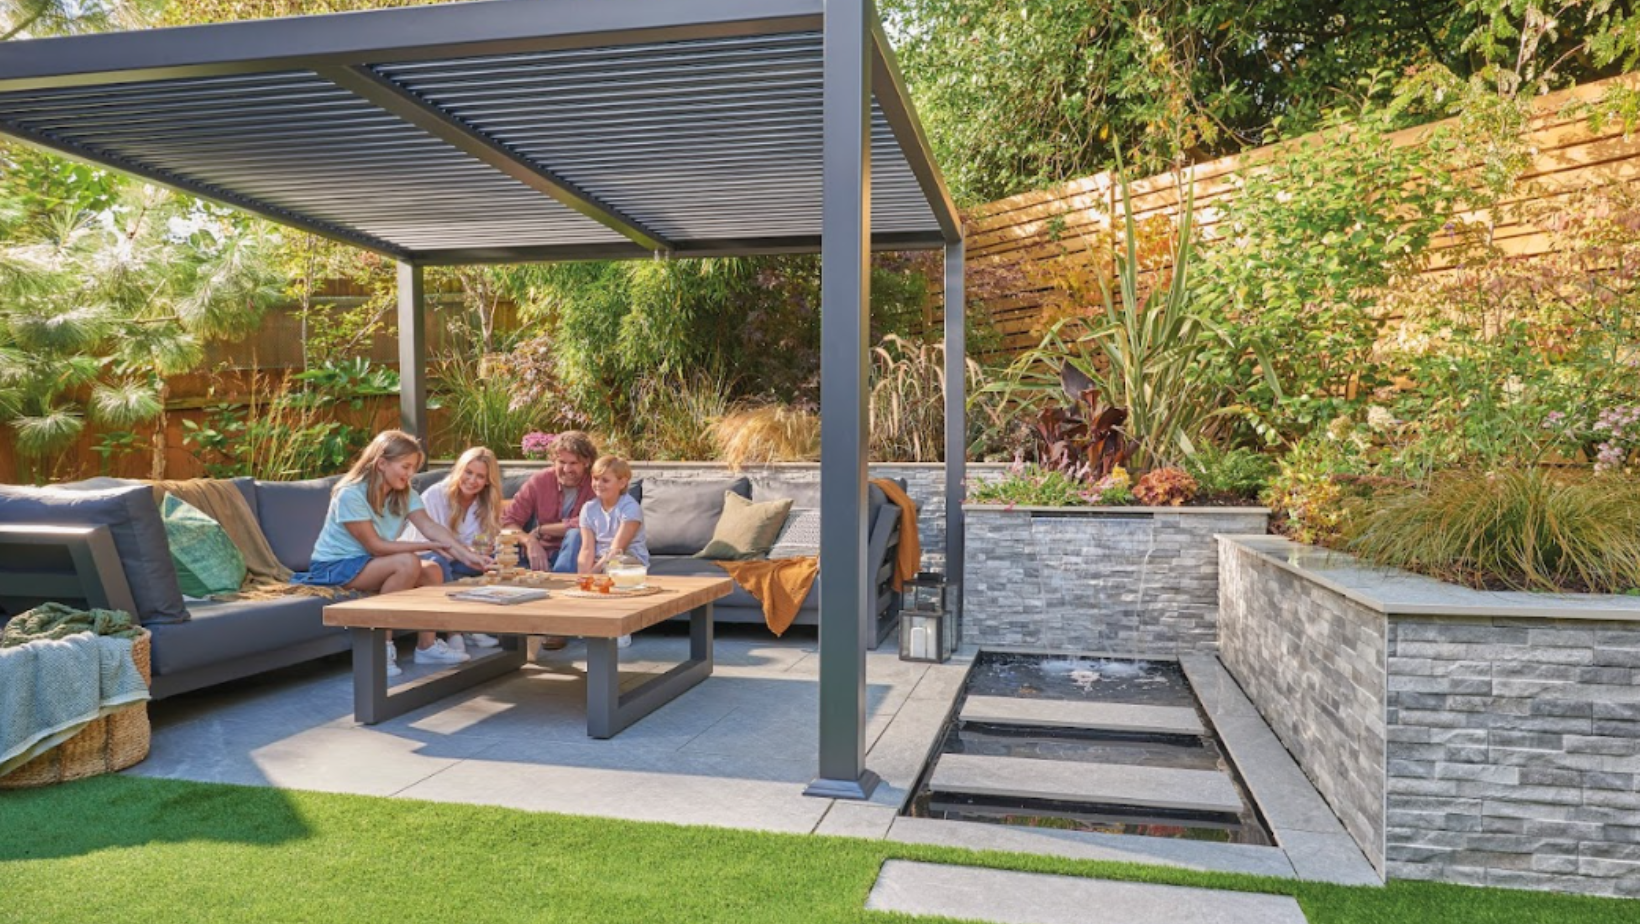 Why You Need A Covered Garden Seating Area In Summer